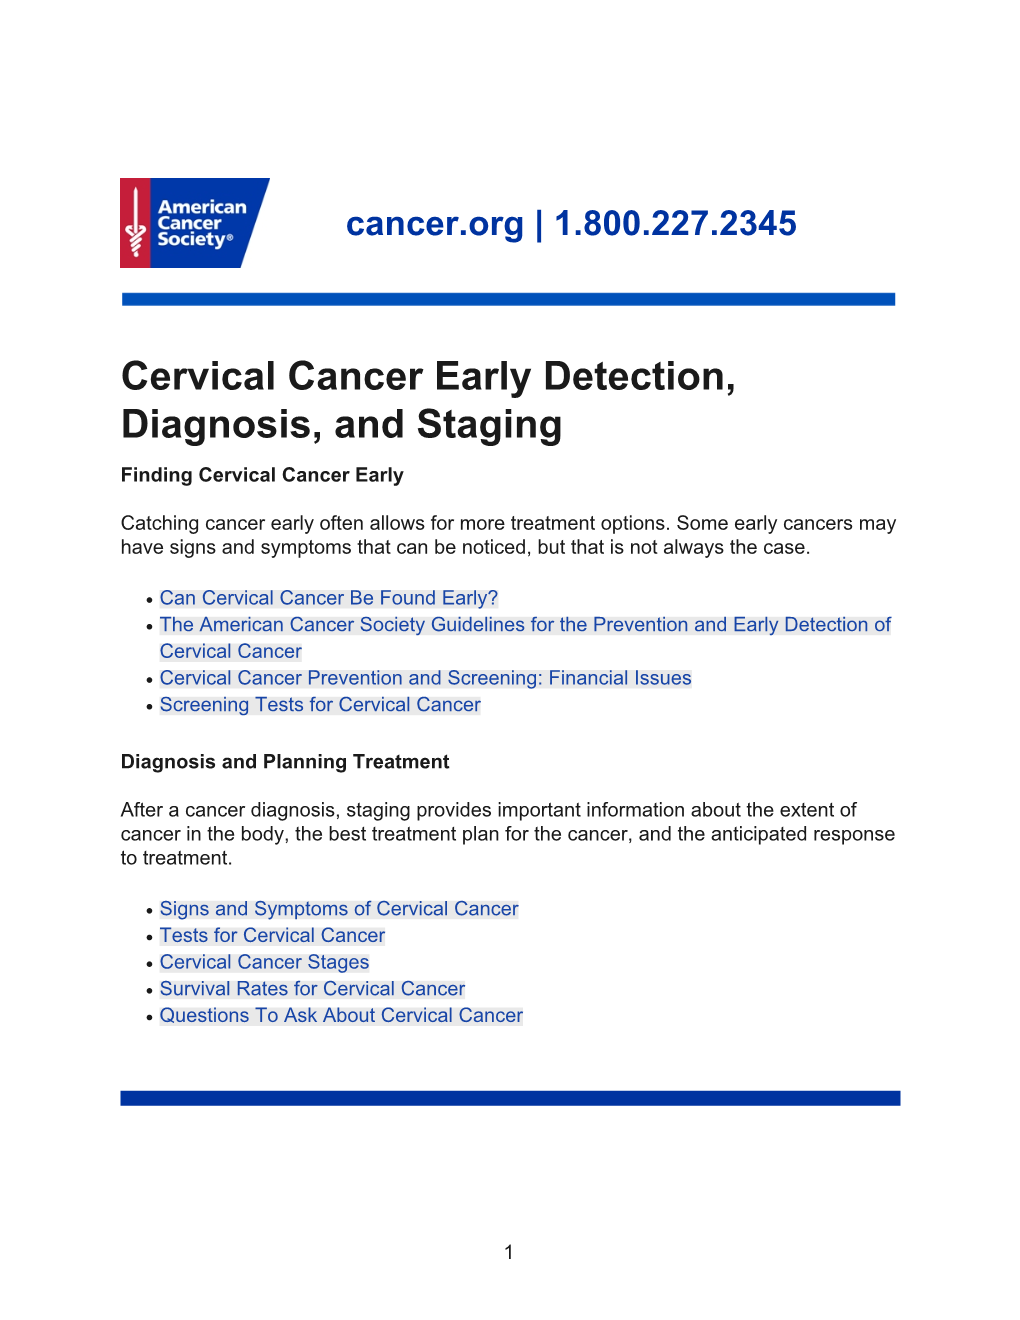 Cervical Cancer Early Detection, Diagnosis, and Staging Finding Cervical Cancer Early